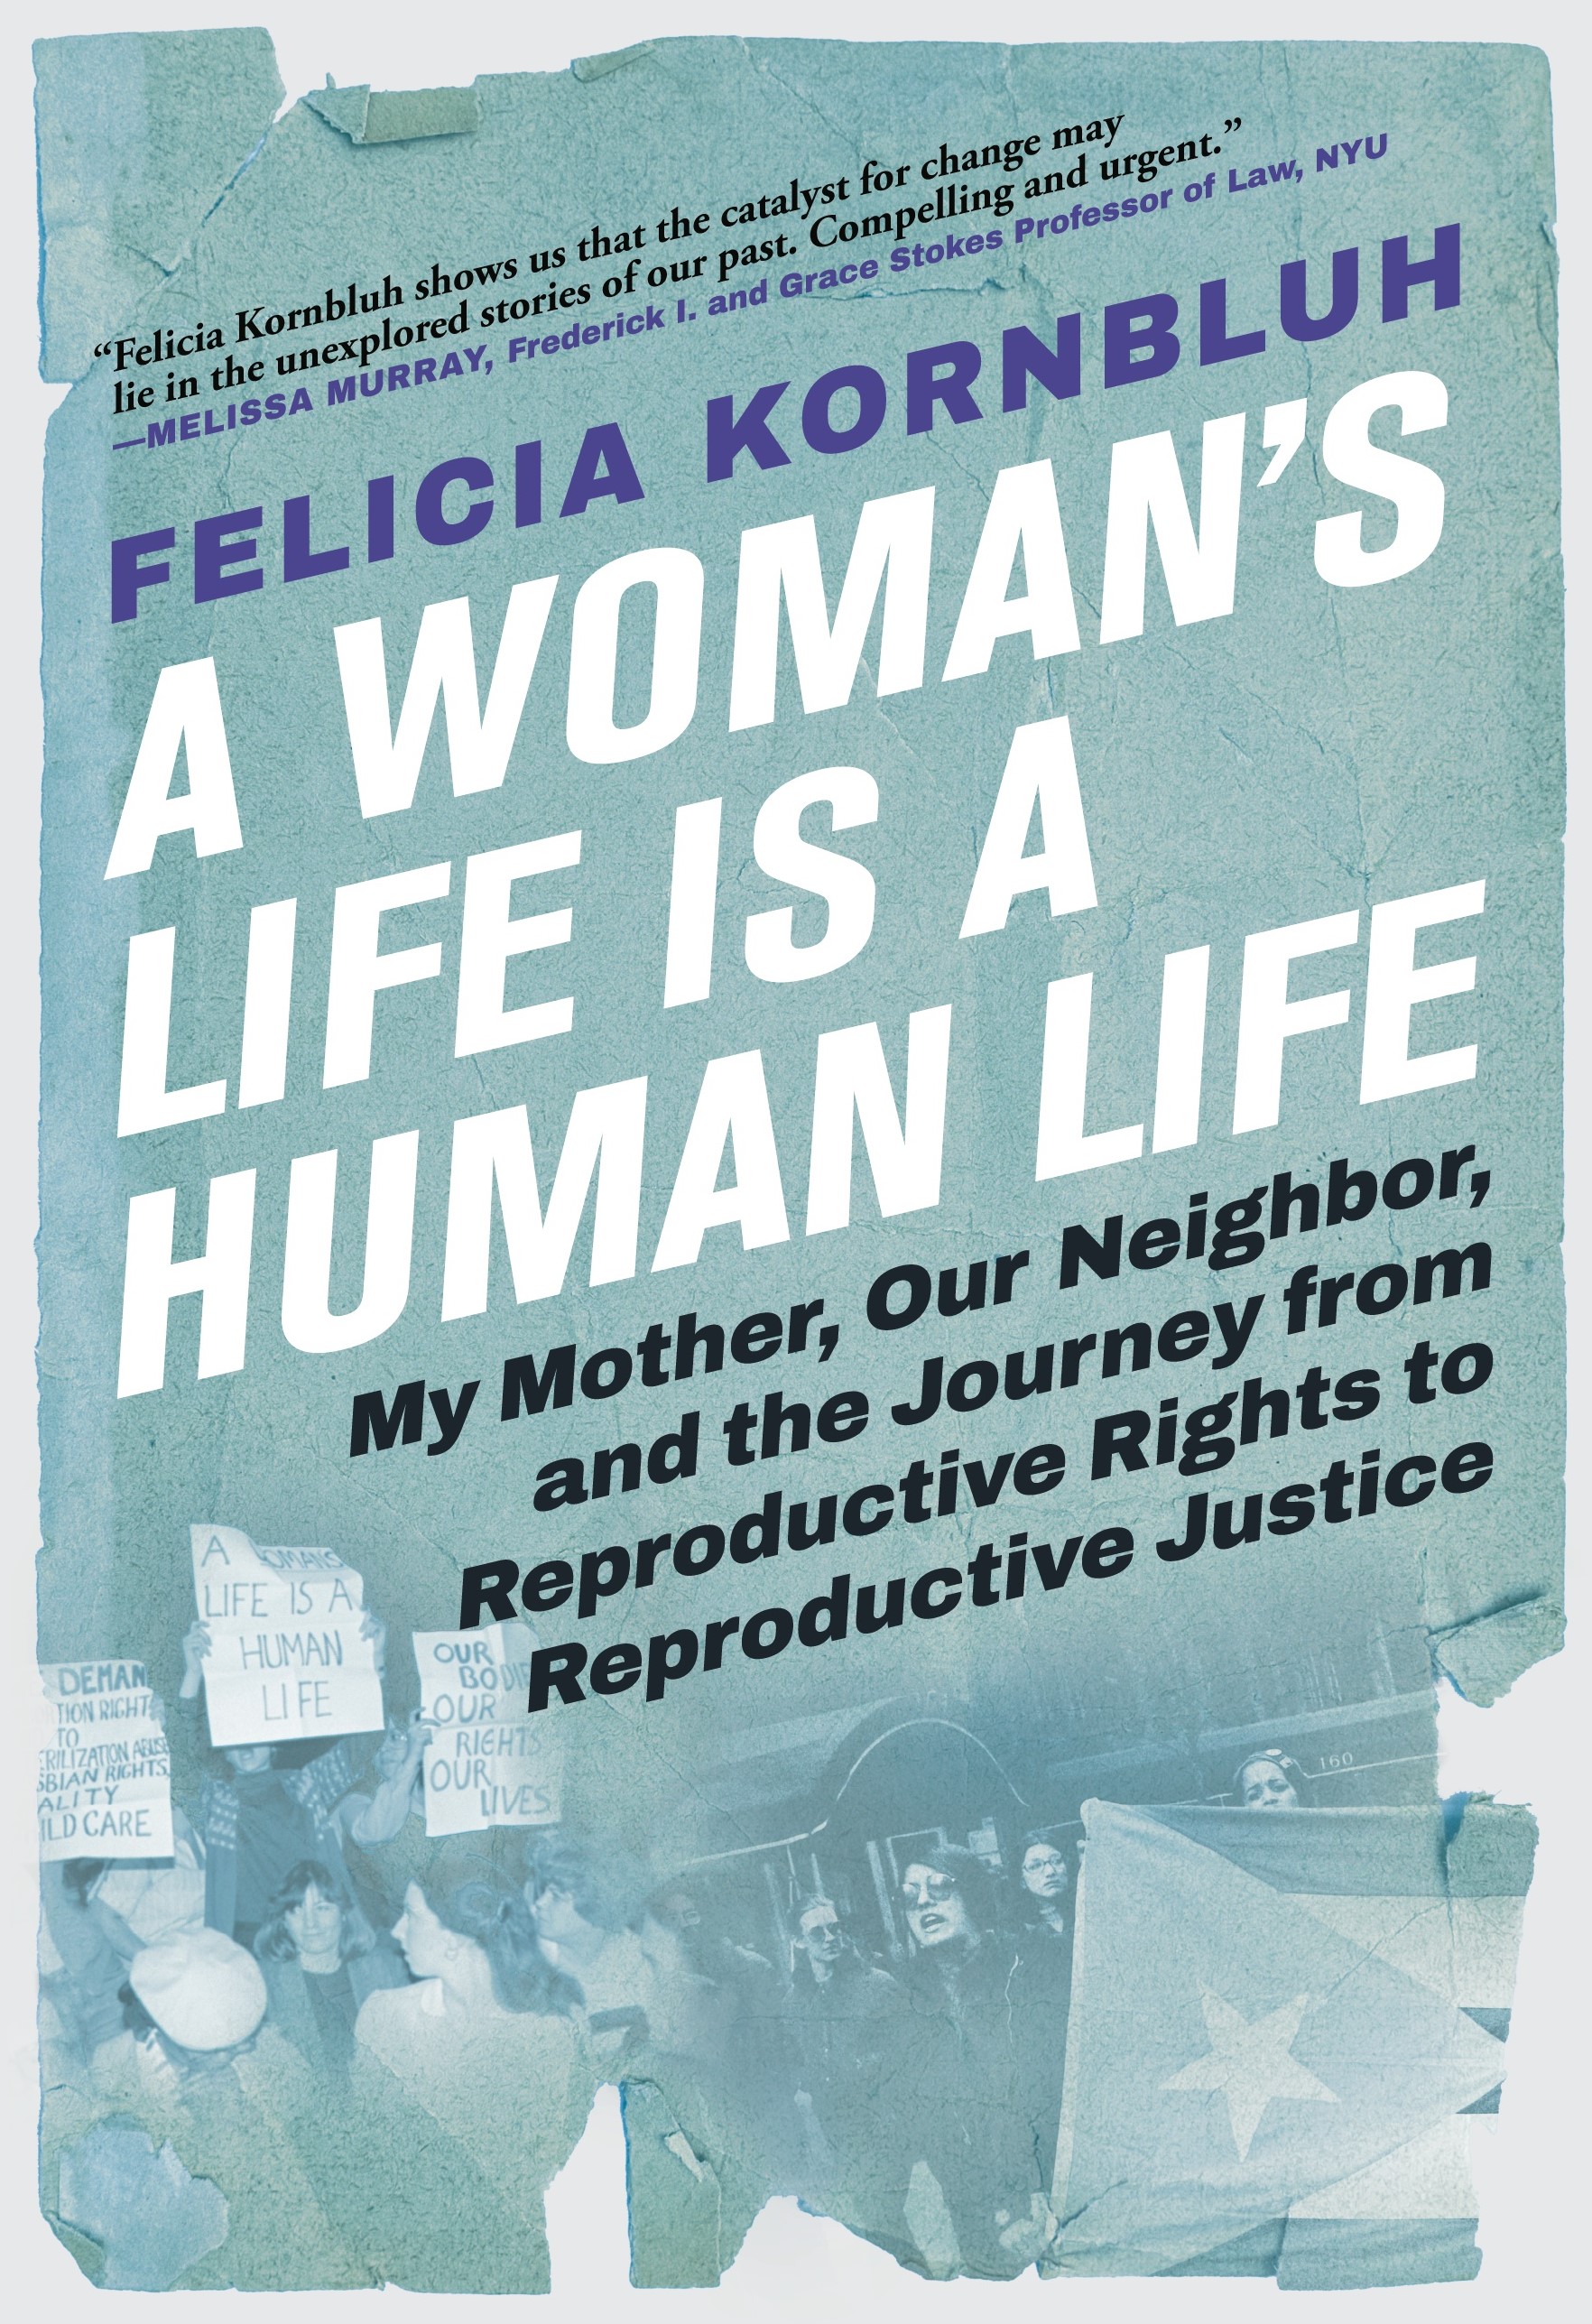 A Woman’s Life Is a Human Life: My Mother, Our Neighbor, and the Journey from Reproductive Rights to Reproductive Justice